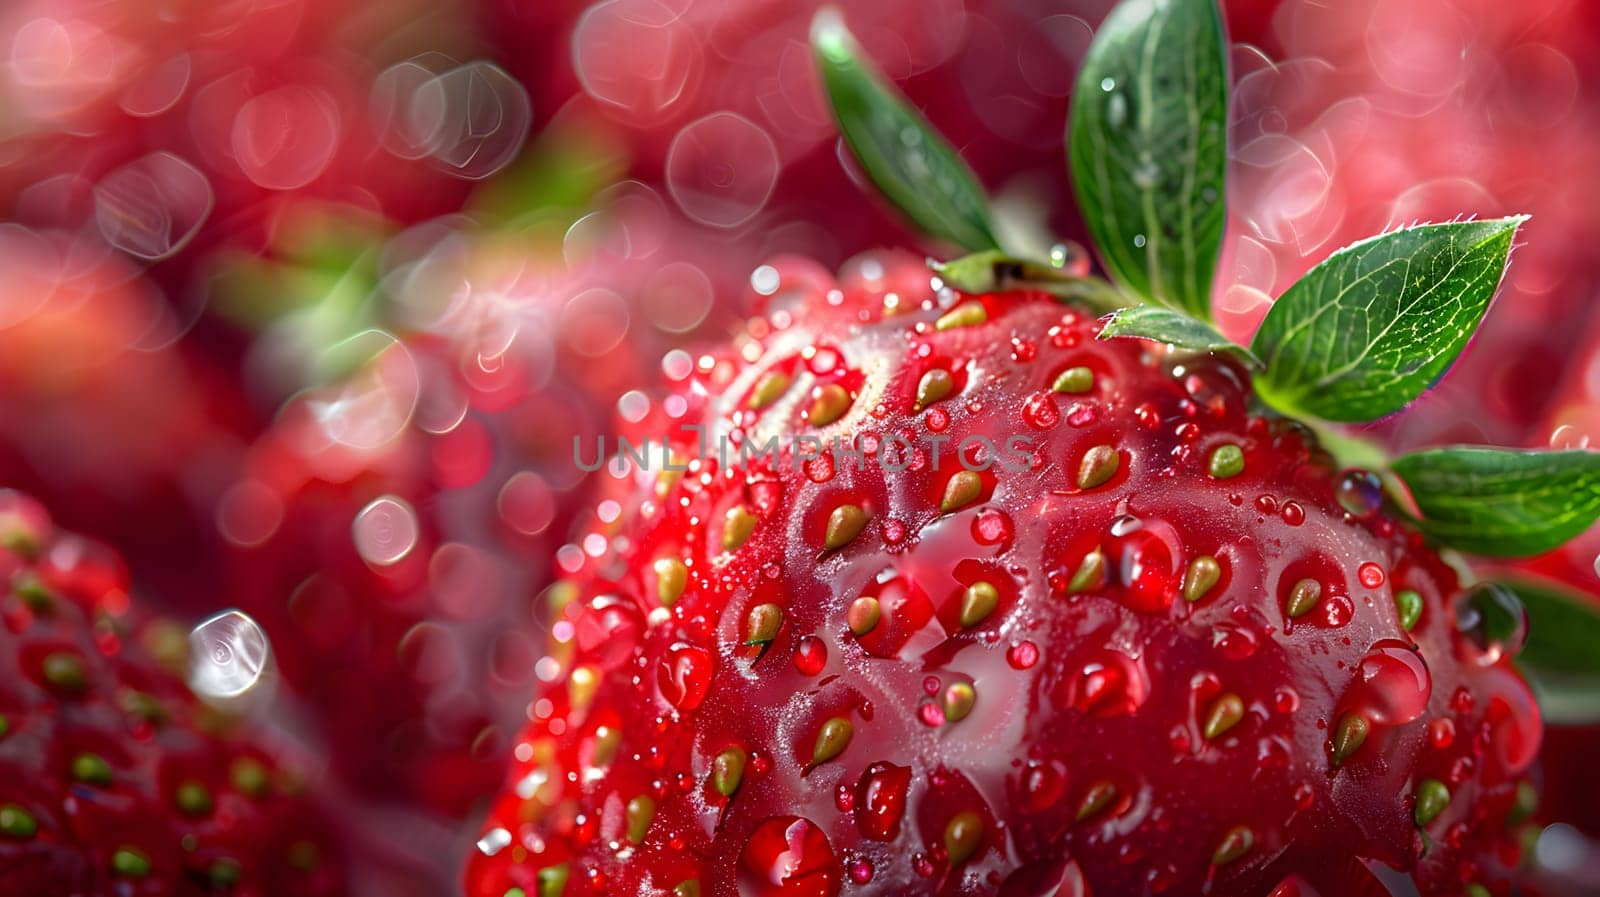 Closeup of a strawberry, a seedless fruit, glistening with water droplets by Nadtochiy